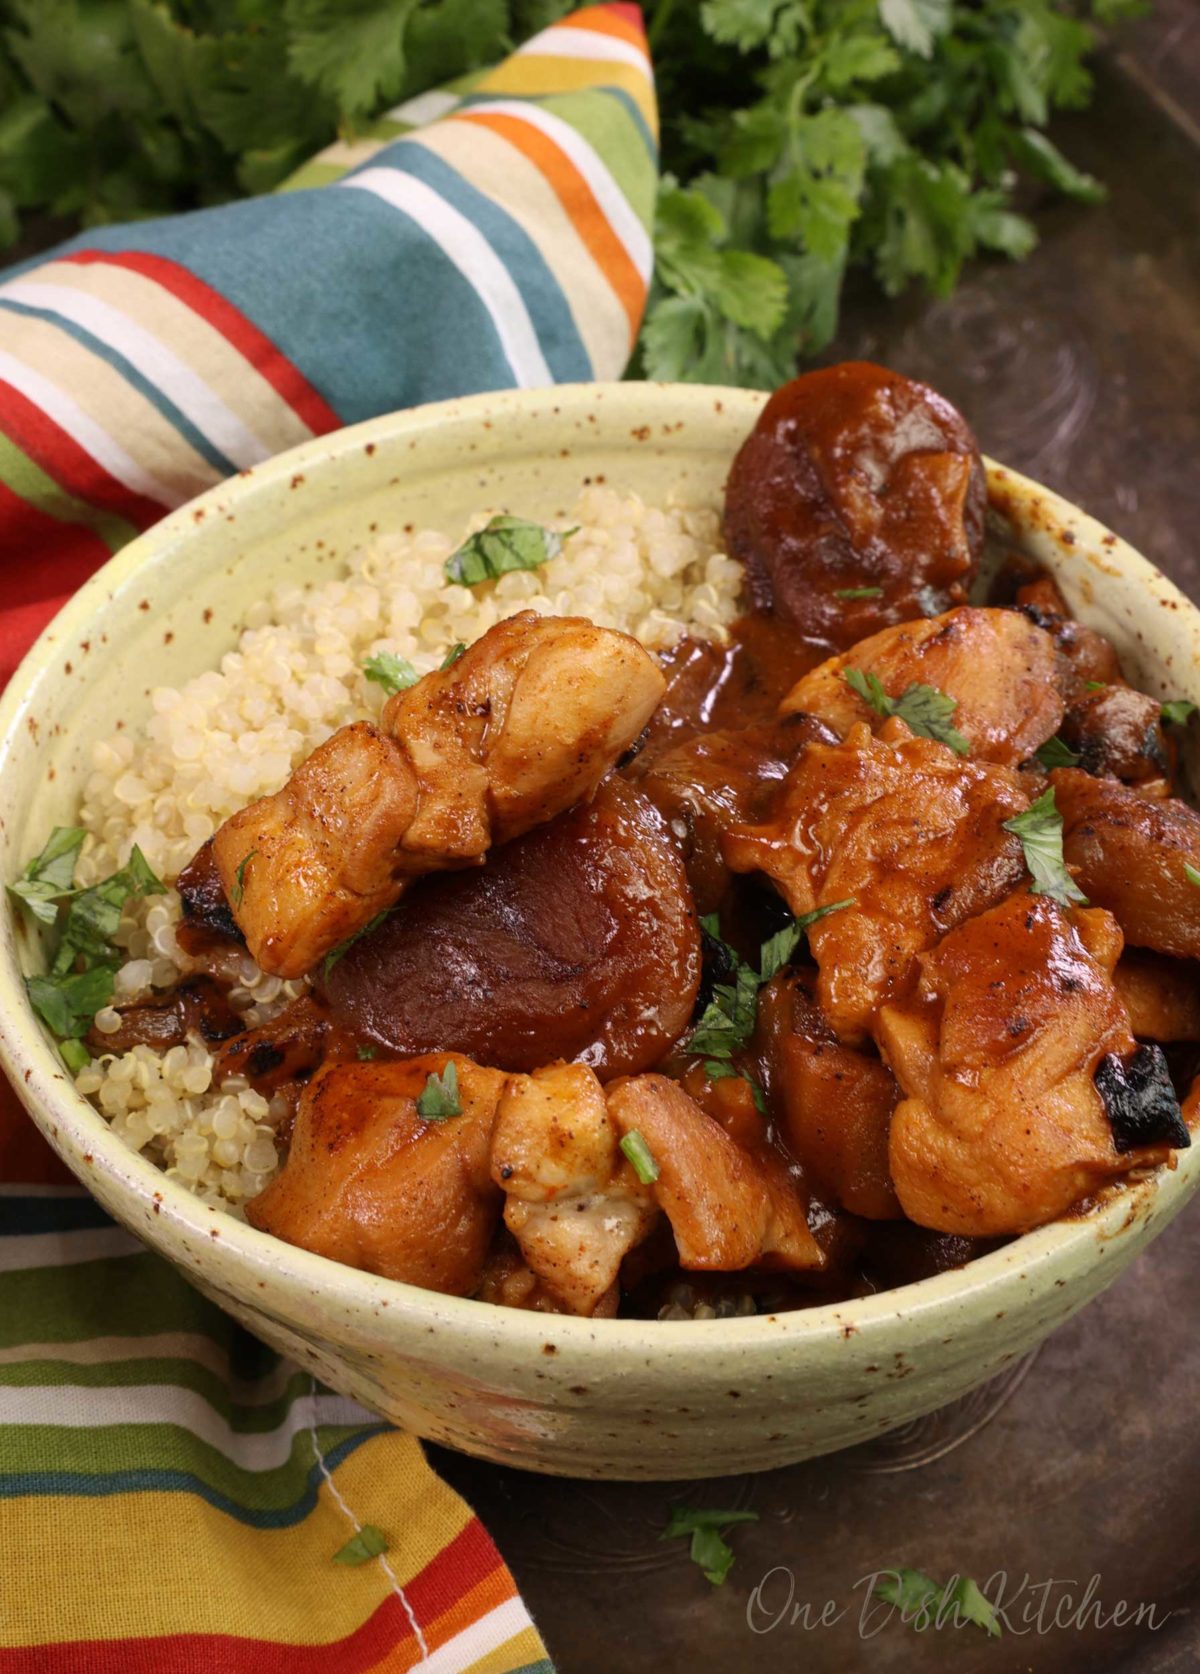 a yellow bowl filled with eggplant and chicken tagine over quinoa next to a striped red and blue napkin on a silver tray.